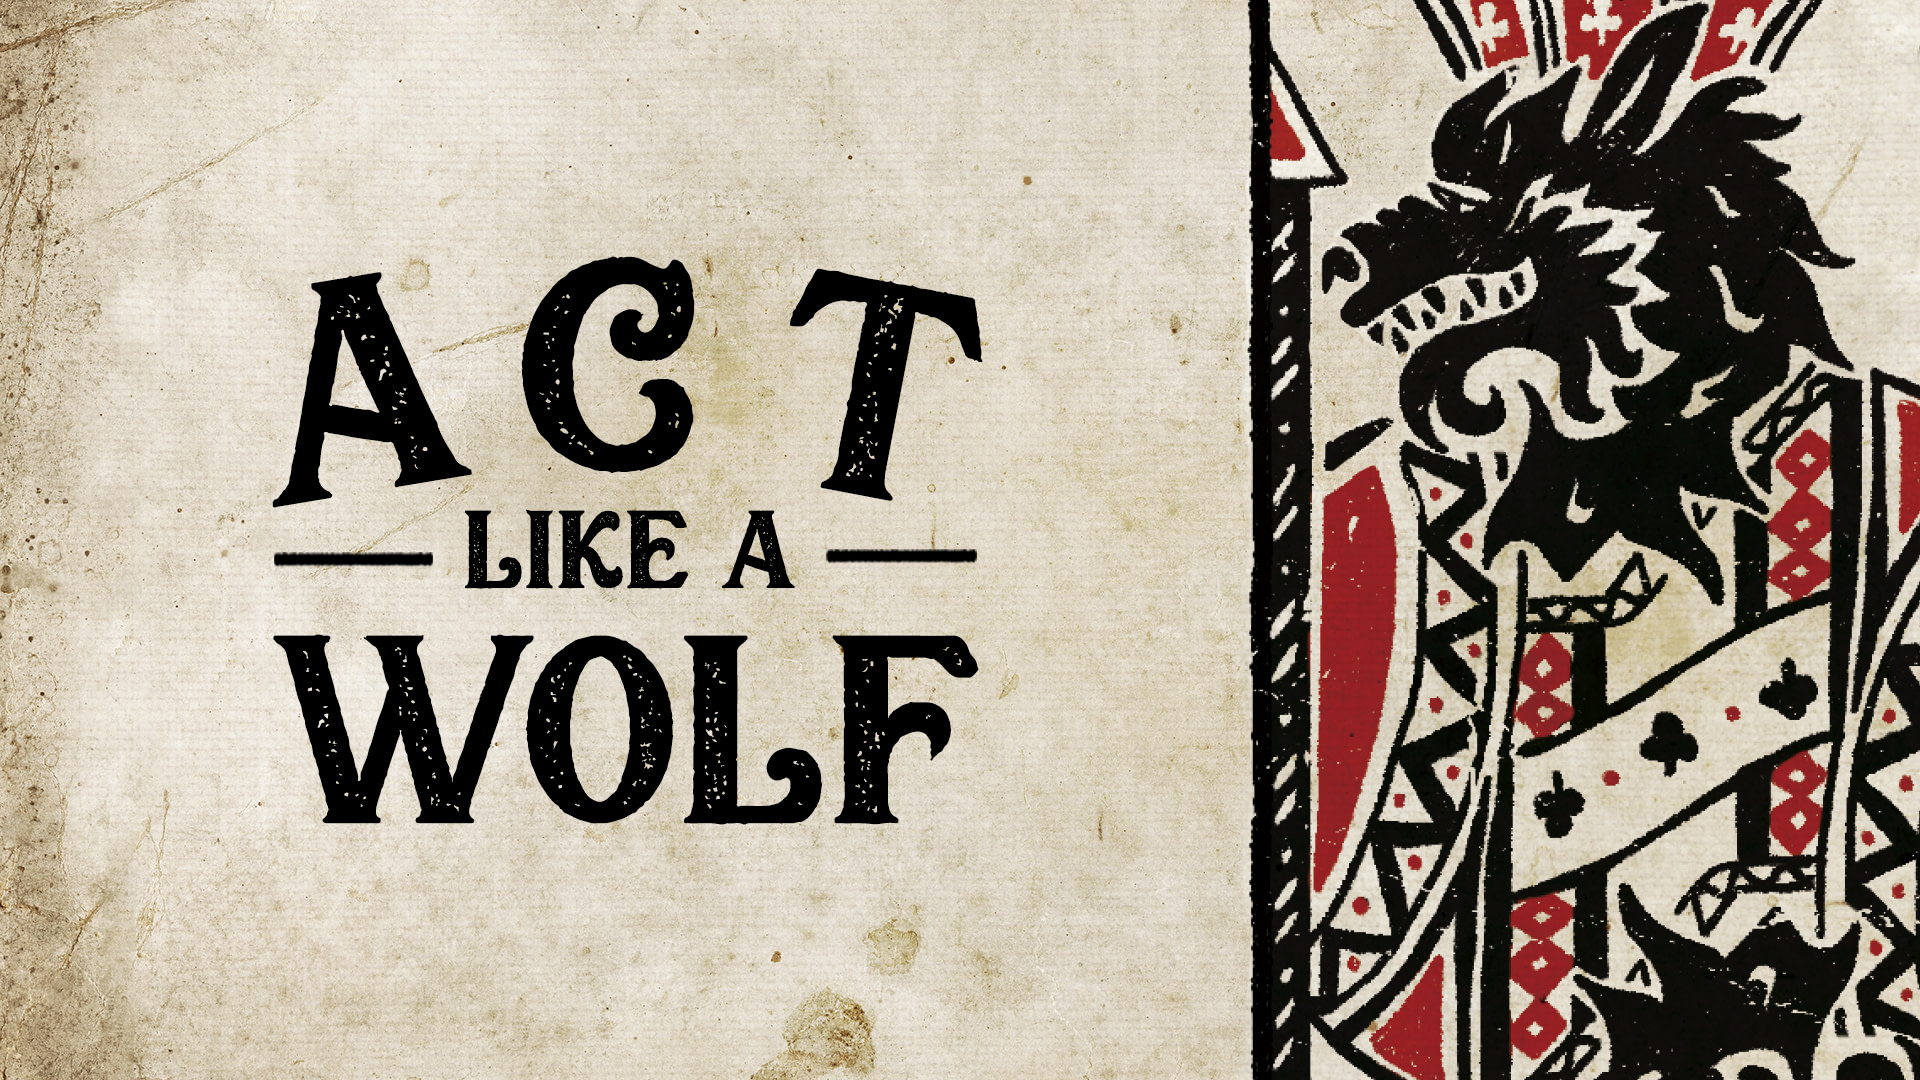 Act like a wolf message